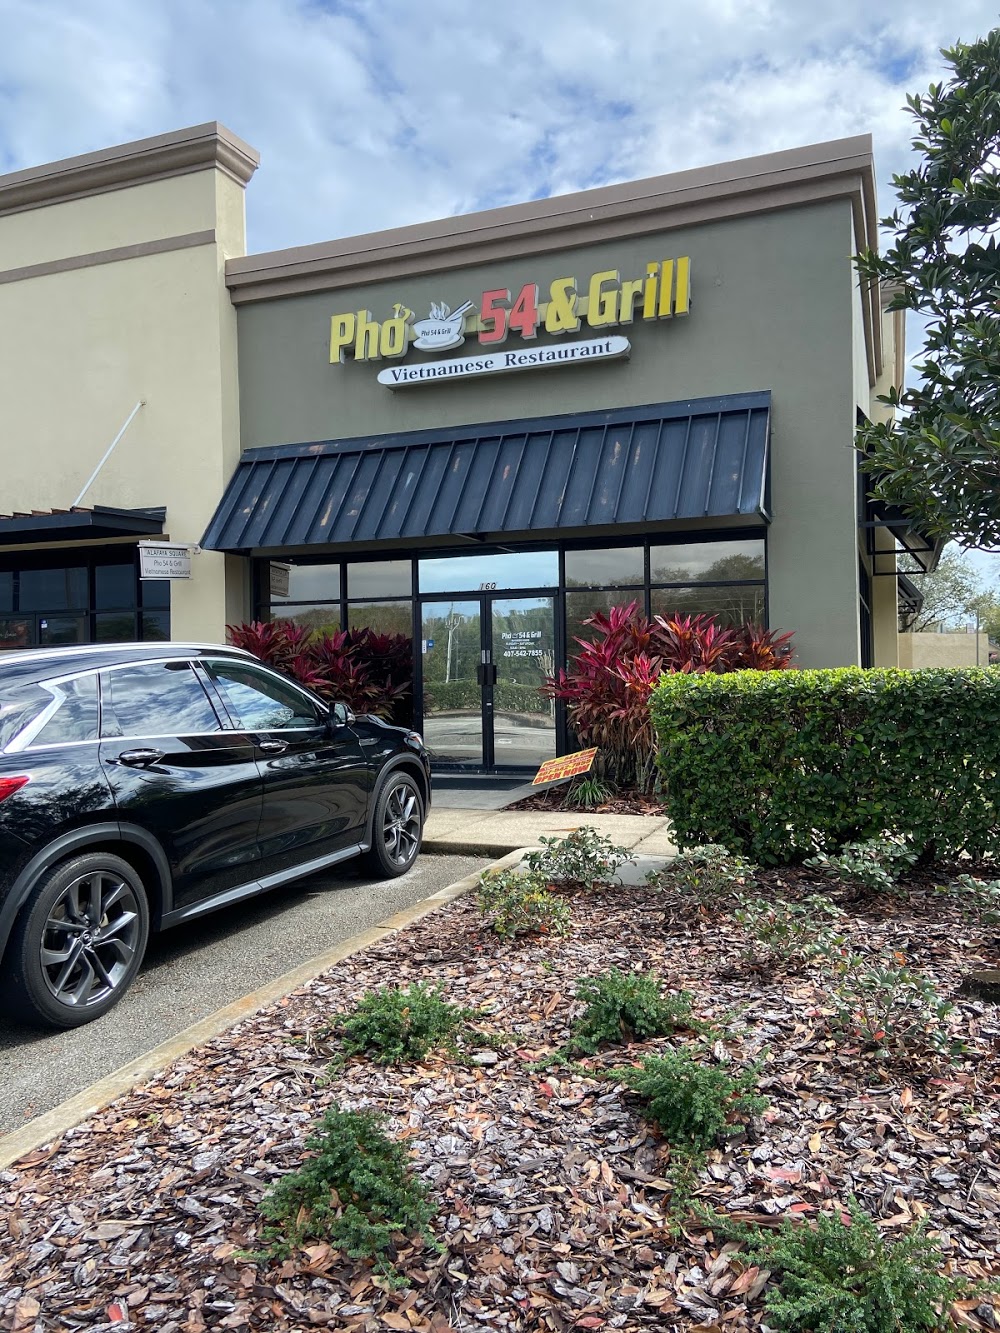 Pho 54 & Grill